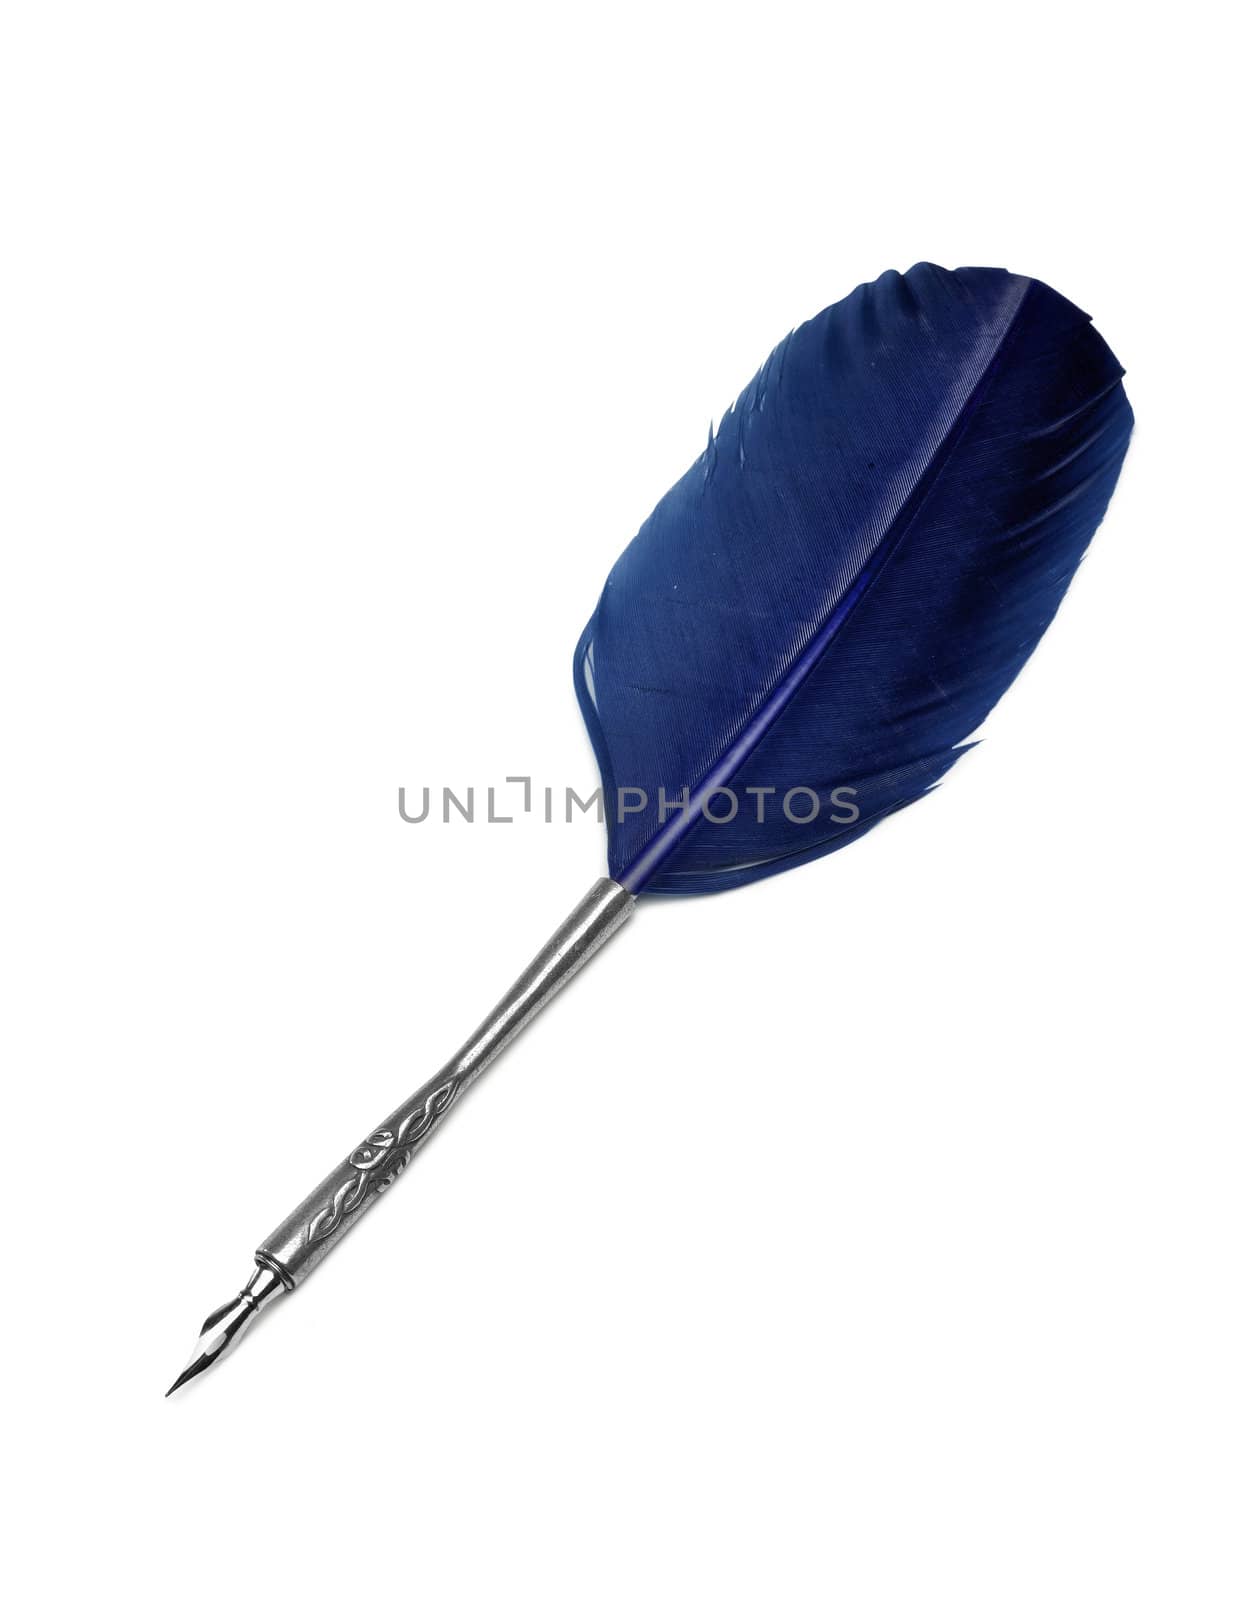 Ink feather tool on white background